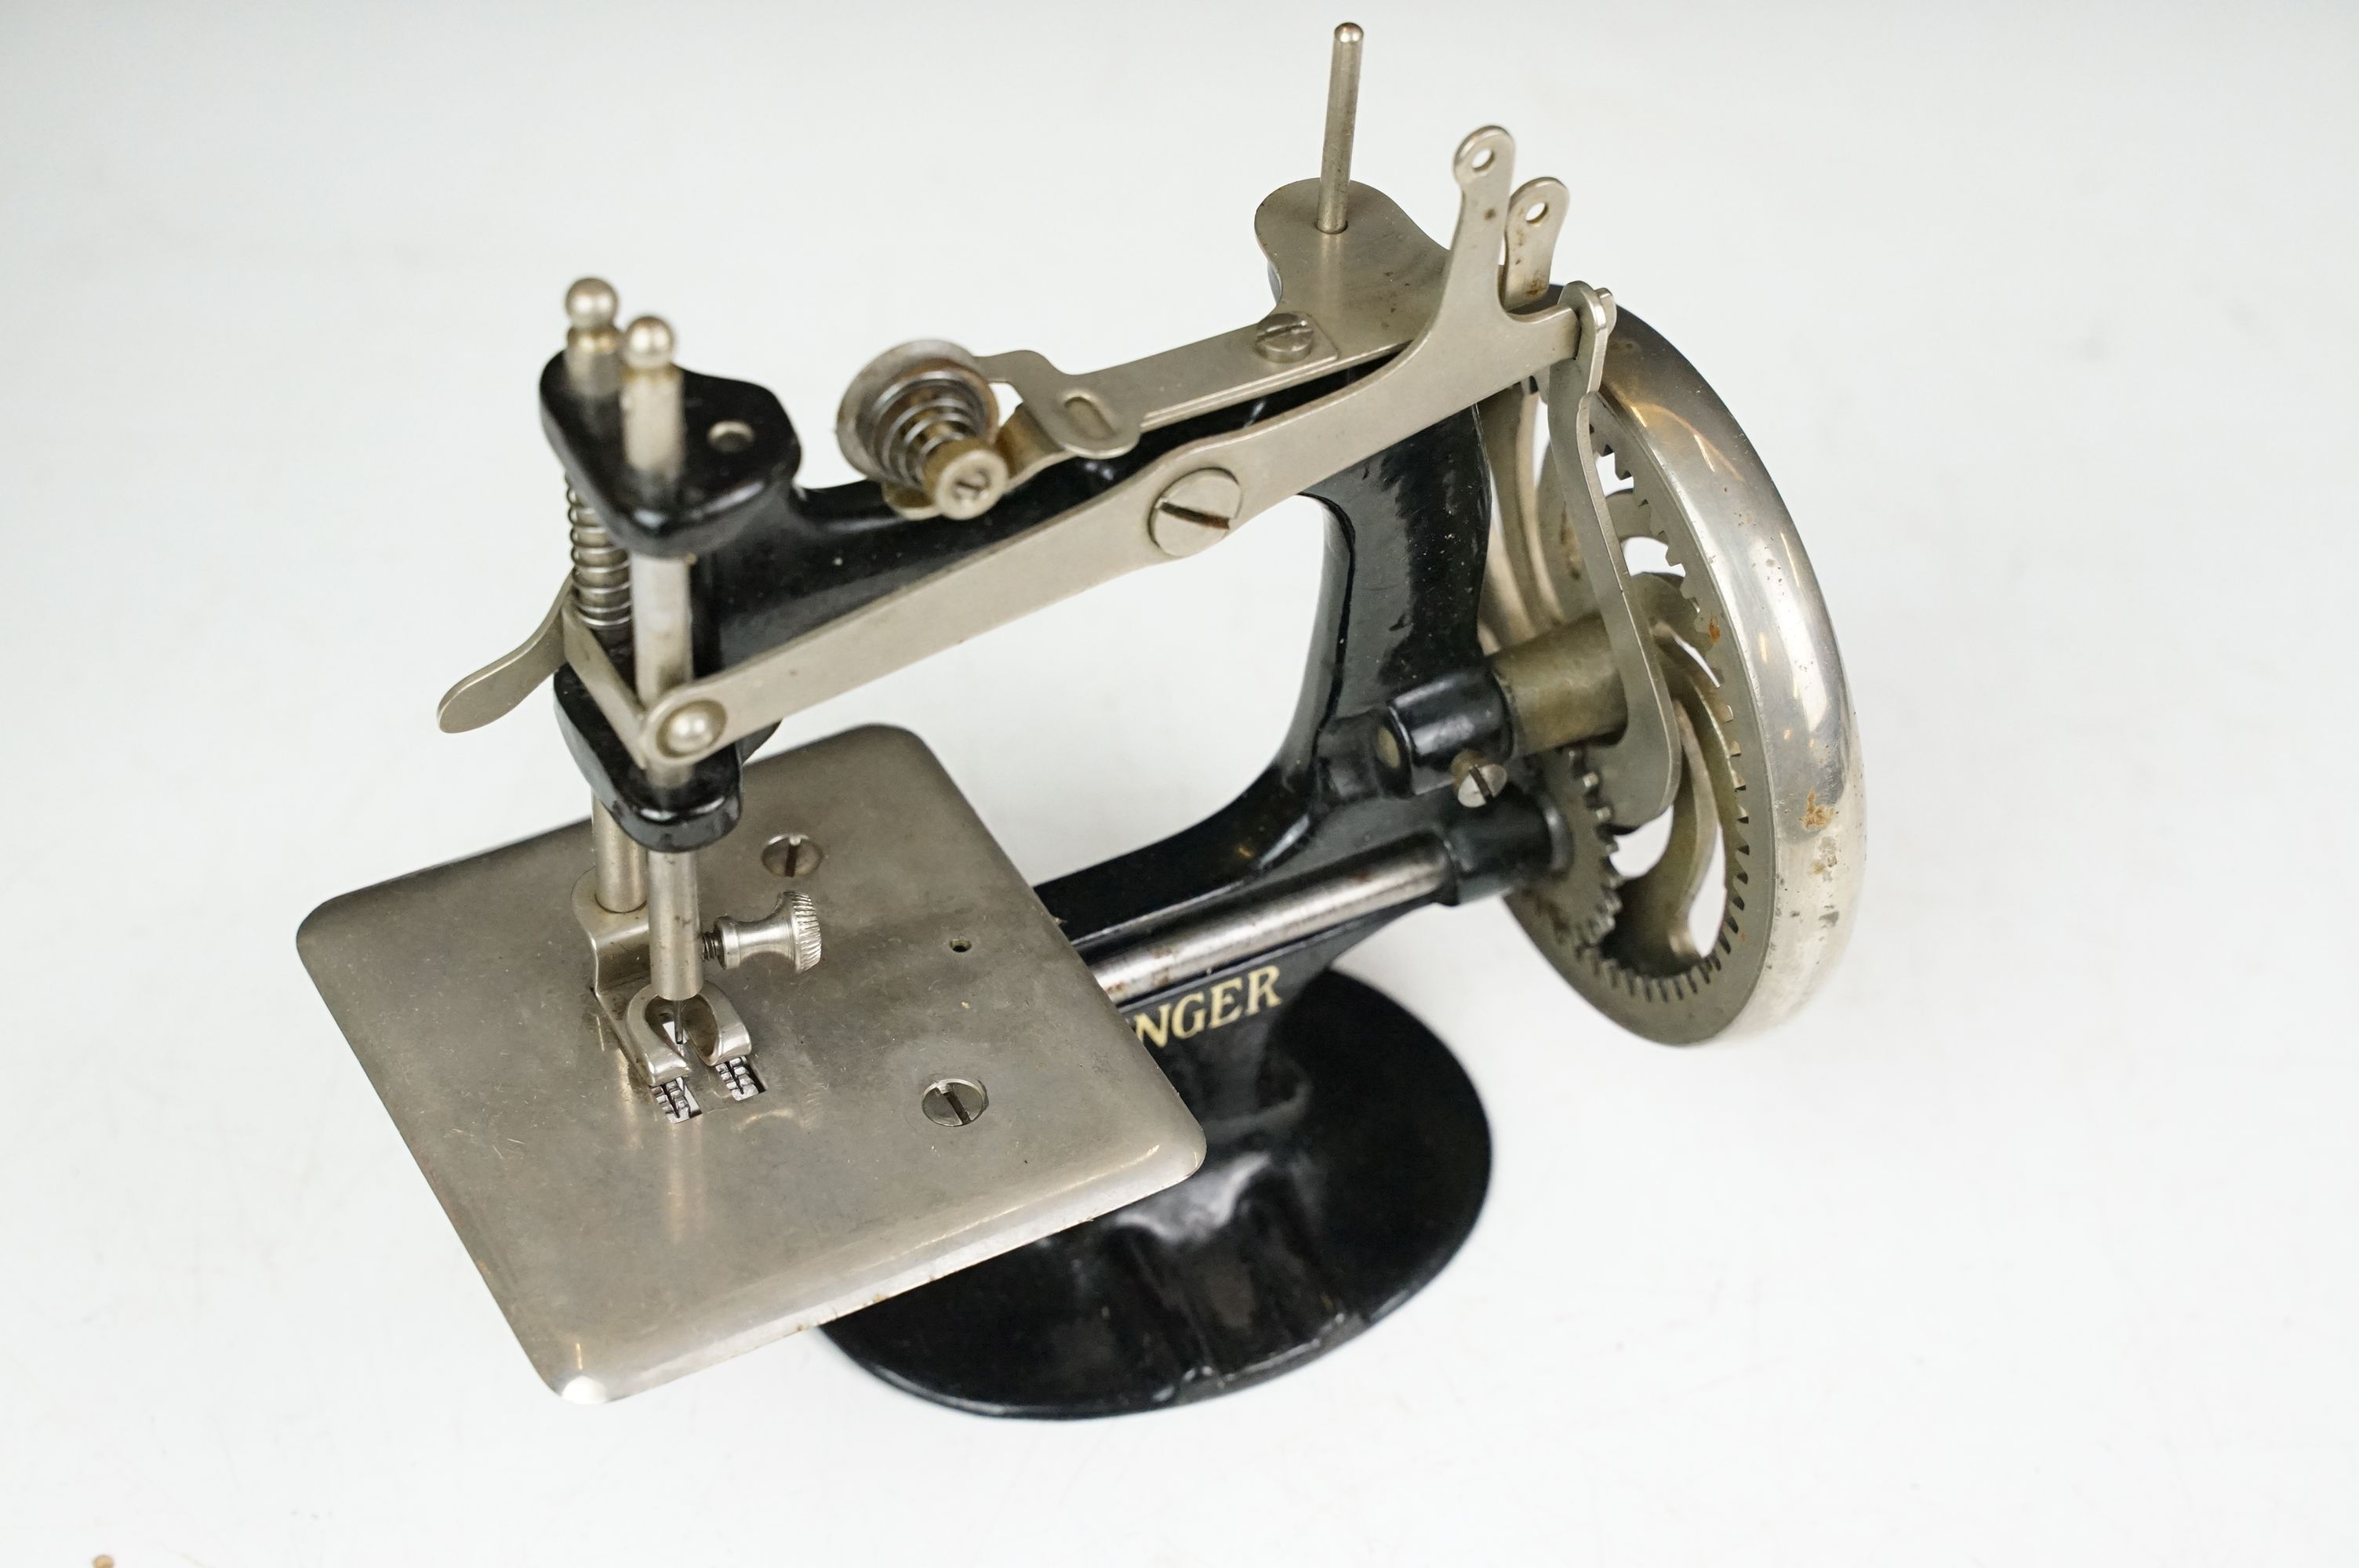 Early 20th century Miniature Singer Sewing Machine No. 20 with the original instruction leaflet - Image 6 of 10